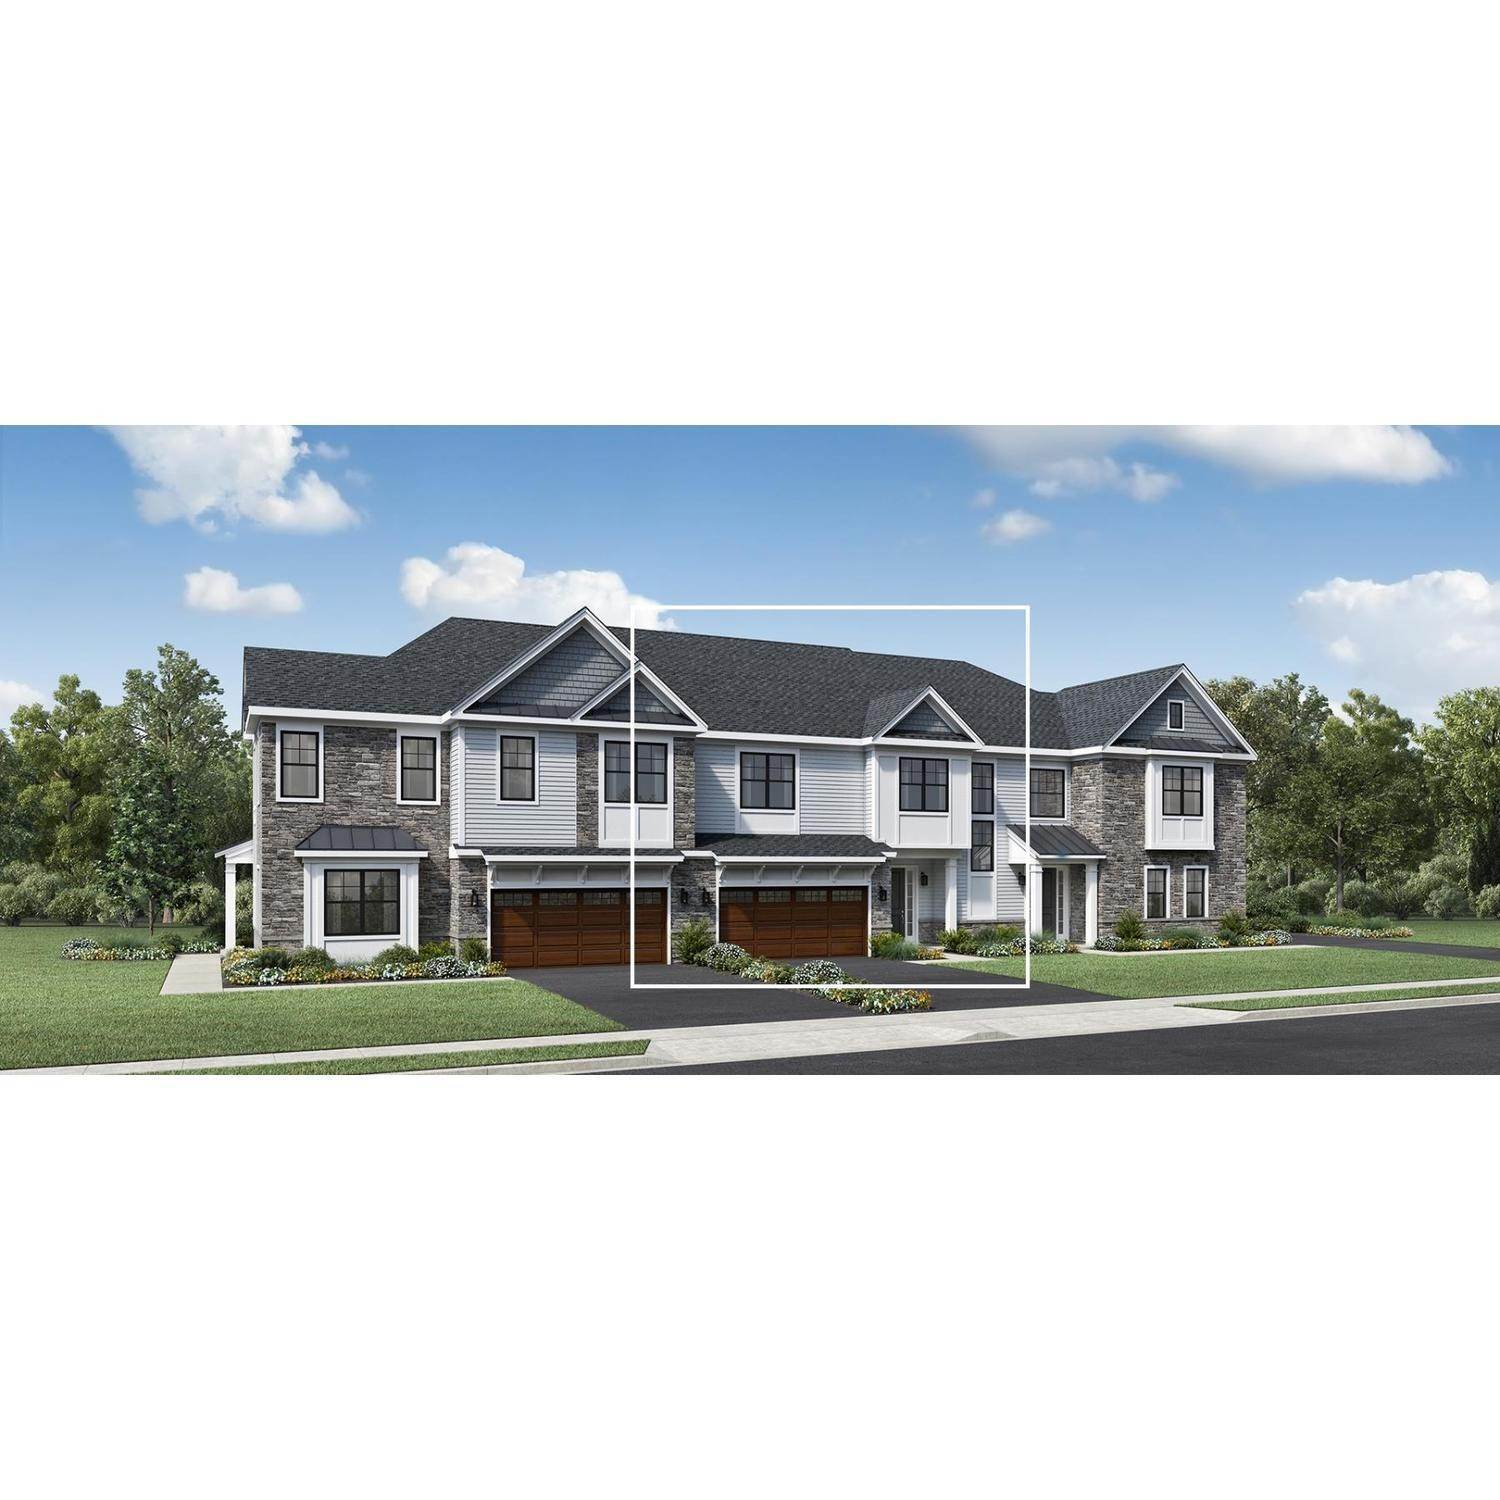 Townhouse for Sale at The Fairways At Edgewood - Carriages Collection 455 Rivervale Rd, River Vale, NJ 07675